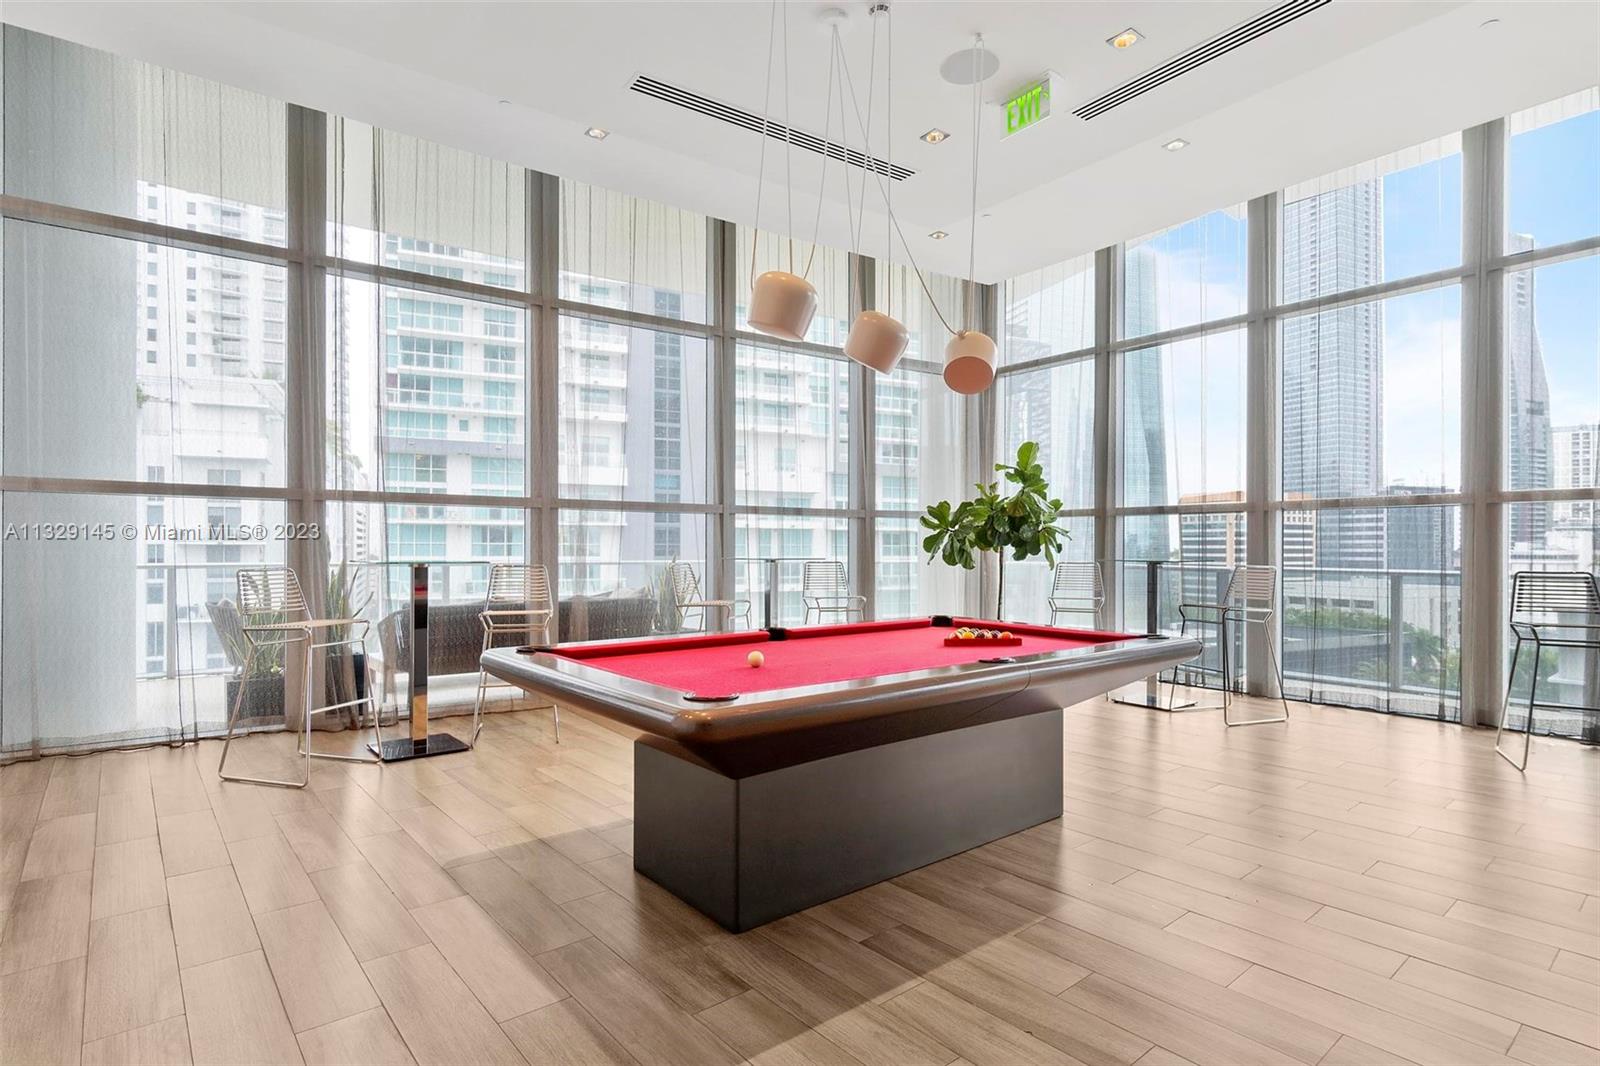 Beautiful and modern 1 Bedroom, 1 Baht, 1 parking space (Valet Parking), centrally located in the heart of financial. Close to the Brickell City Centre. Great finishes. Shades Blackout. Large balcony with City views. Includes one year of storage rent.